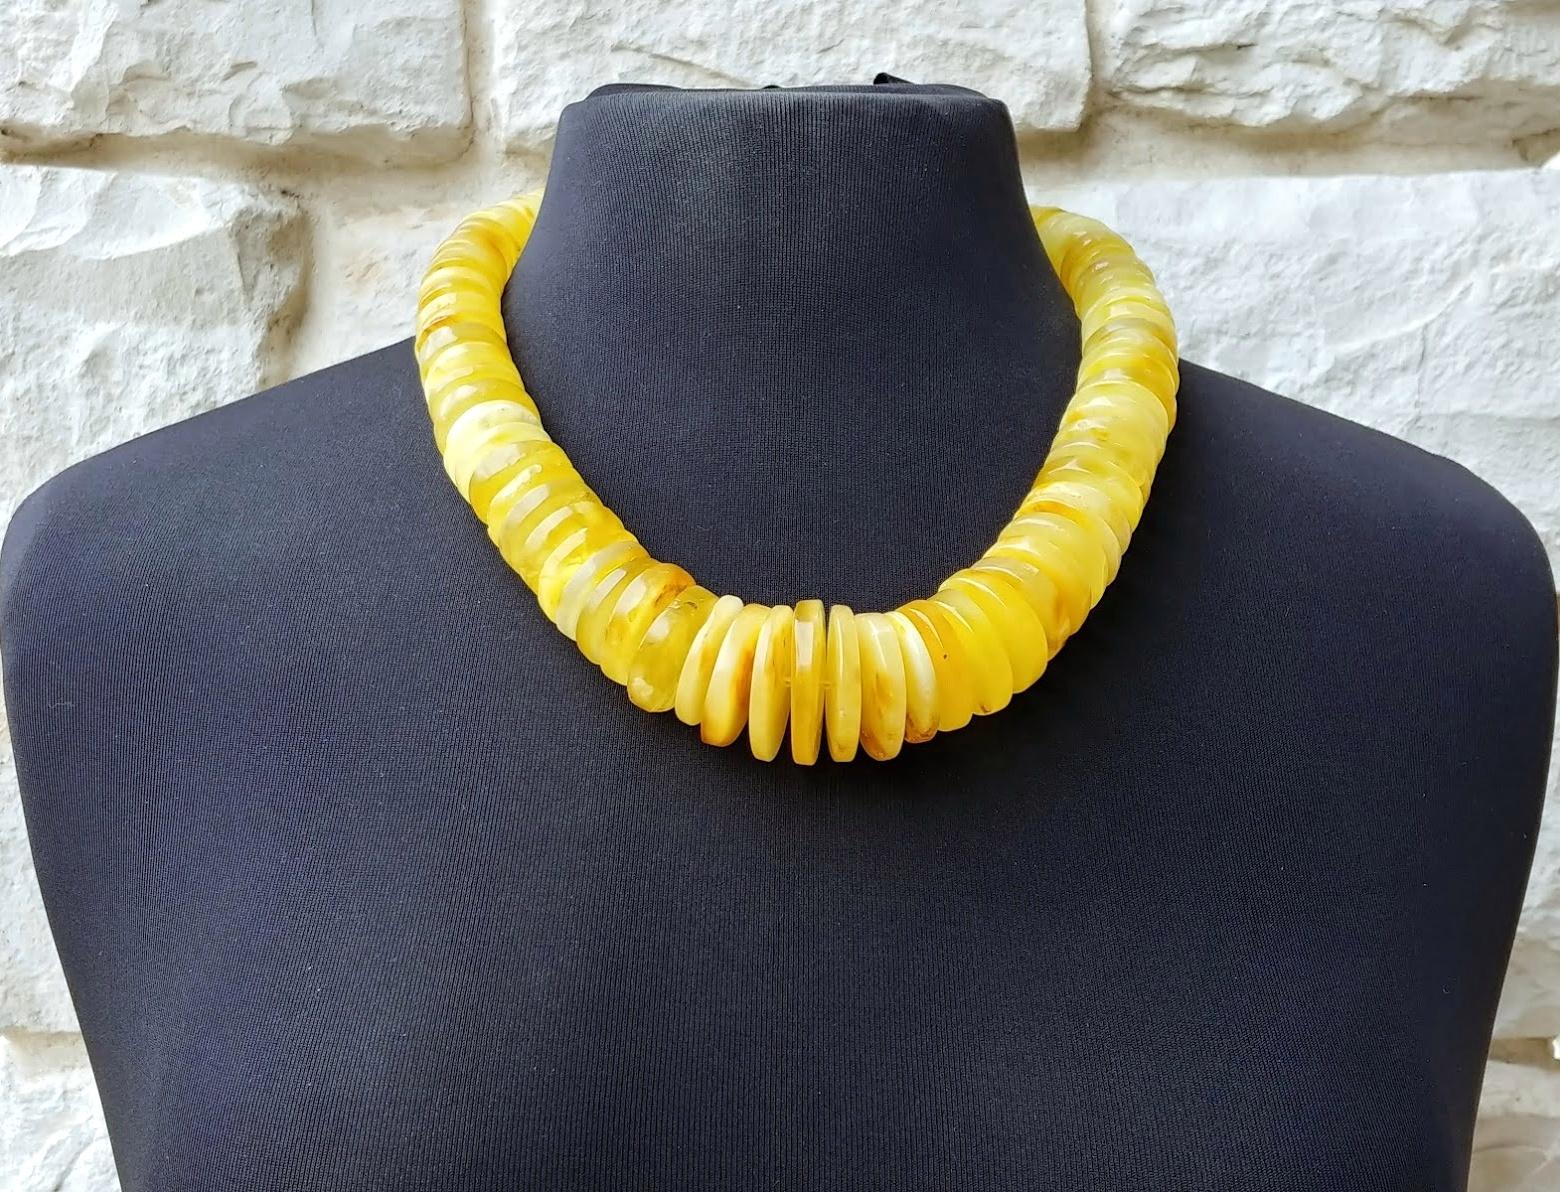 The length of the necklace is 22 inches (55.5cm). Live chopped pieces disks of raw egg yolk Baltic amber. The size varies from 13.5 to 30.7mm.
The color of amber is egg yolk linden honey.
The color is authentic and natural.
100% Natural Baltic